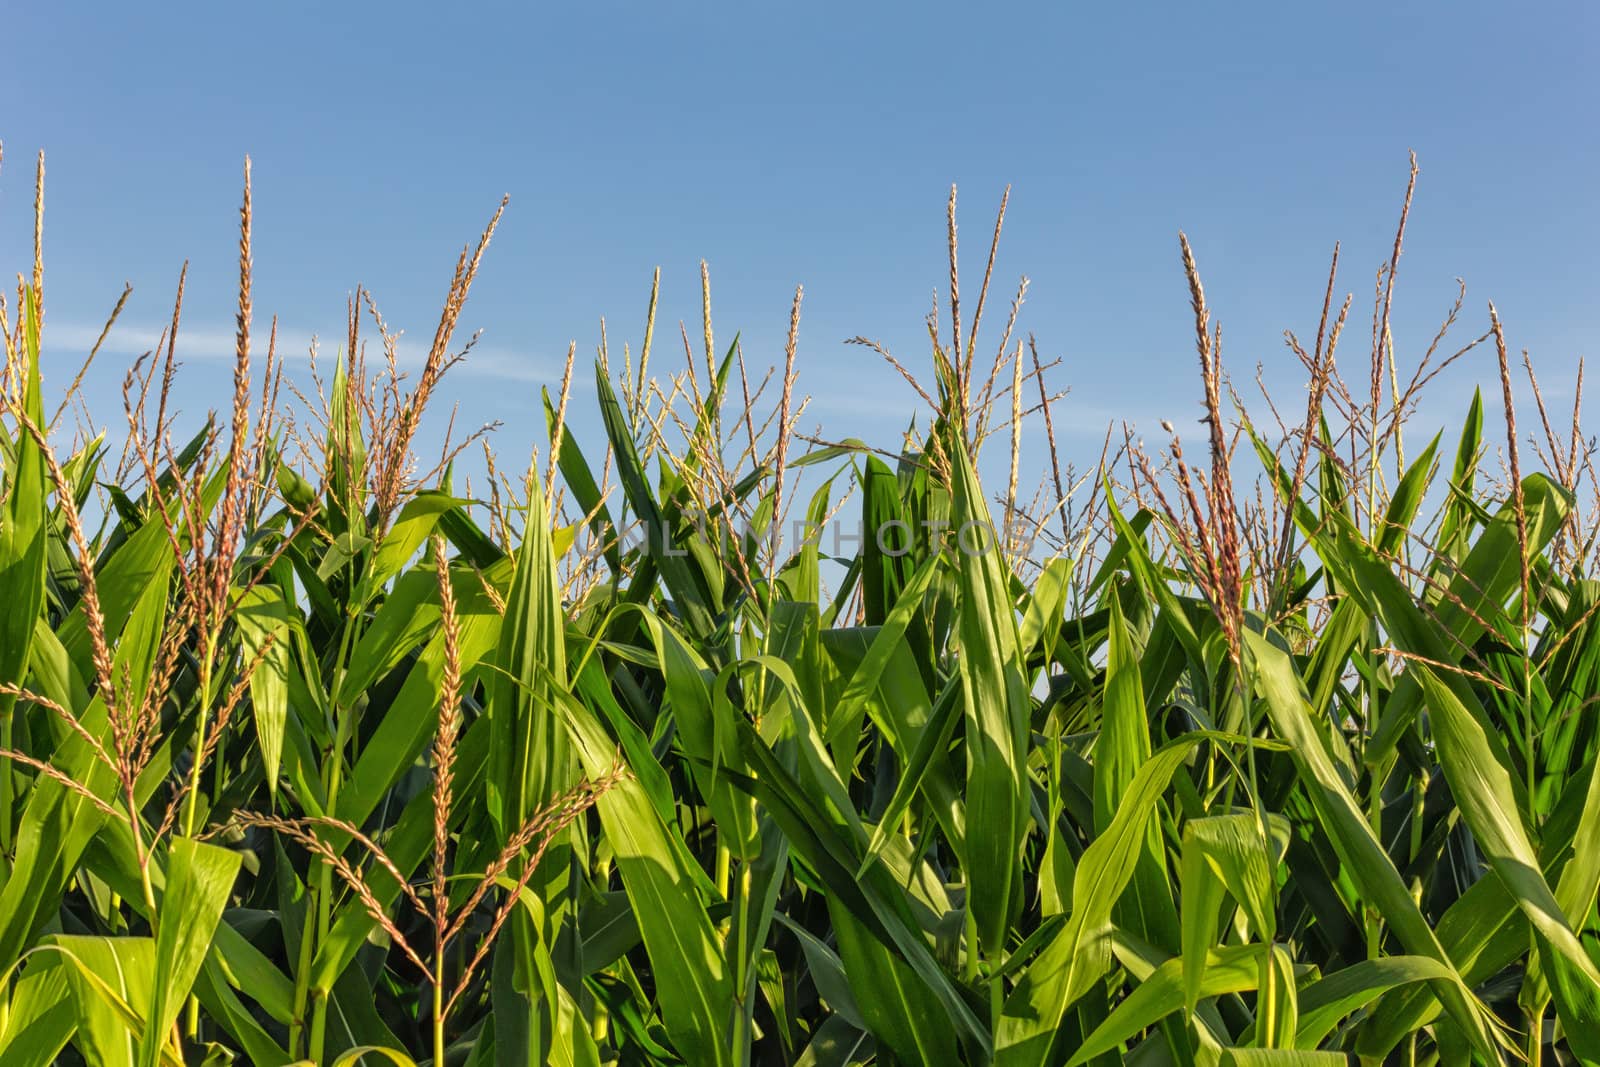 A Tall Row of Field Corn Ready for Harvest